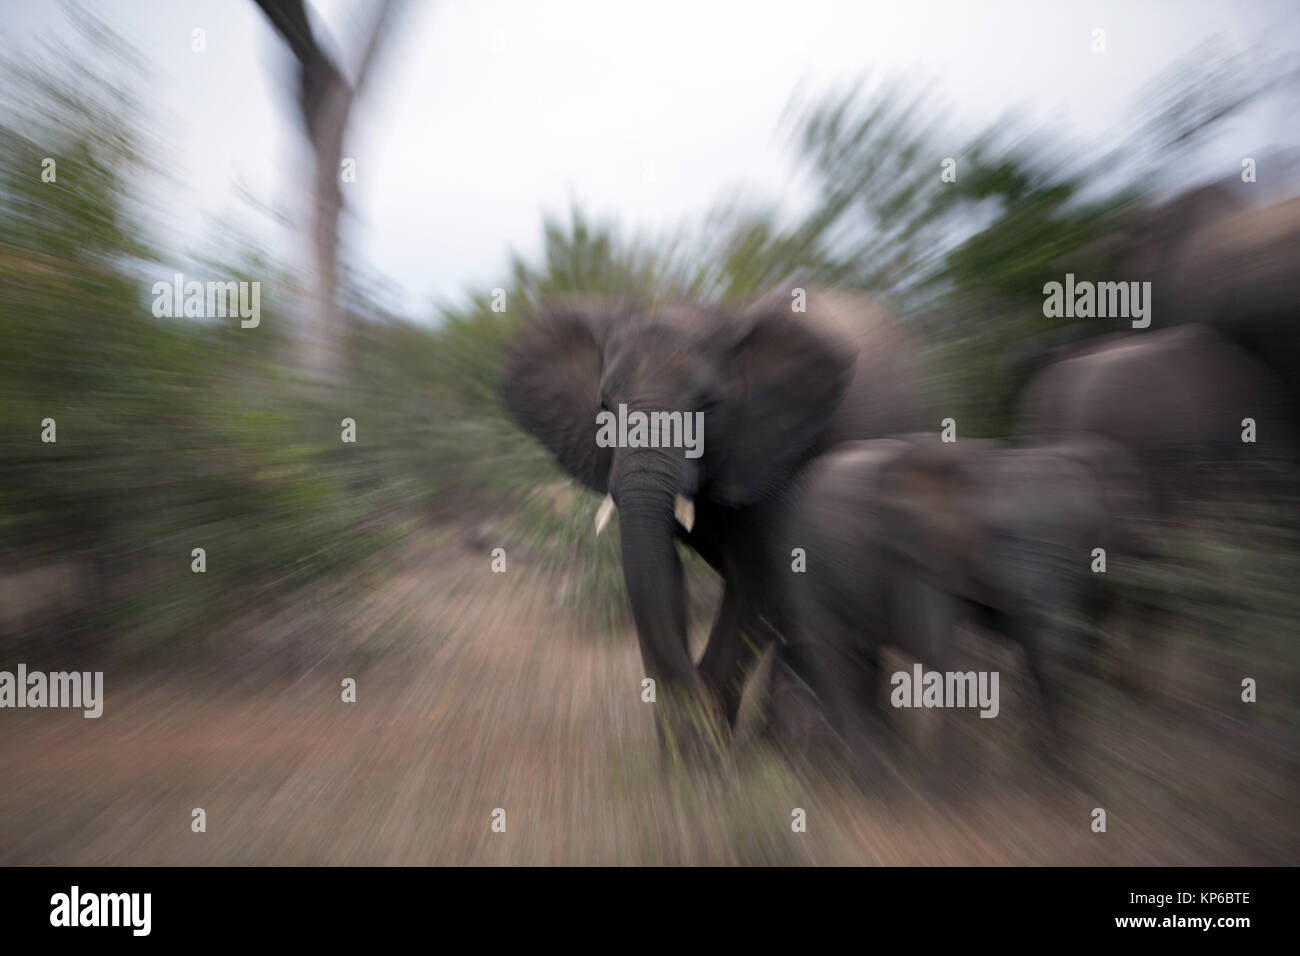 Kruger National Park. Old African Elephant (Loxodonta africana). South Africa. Stock Photo